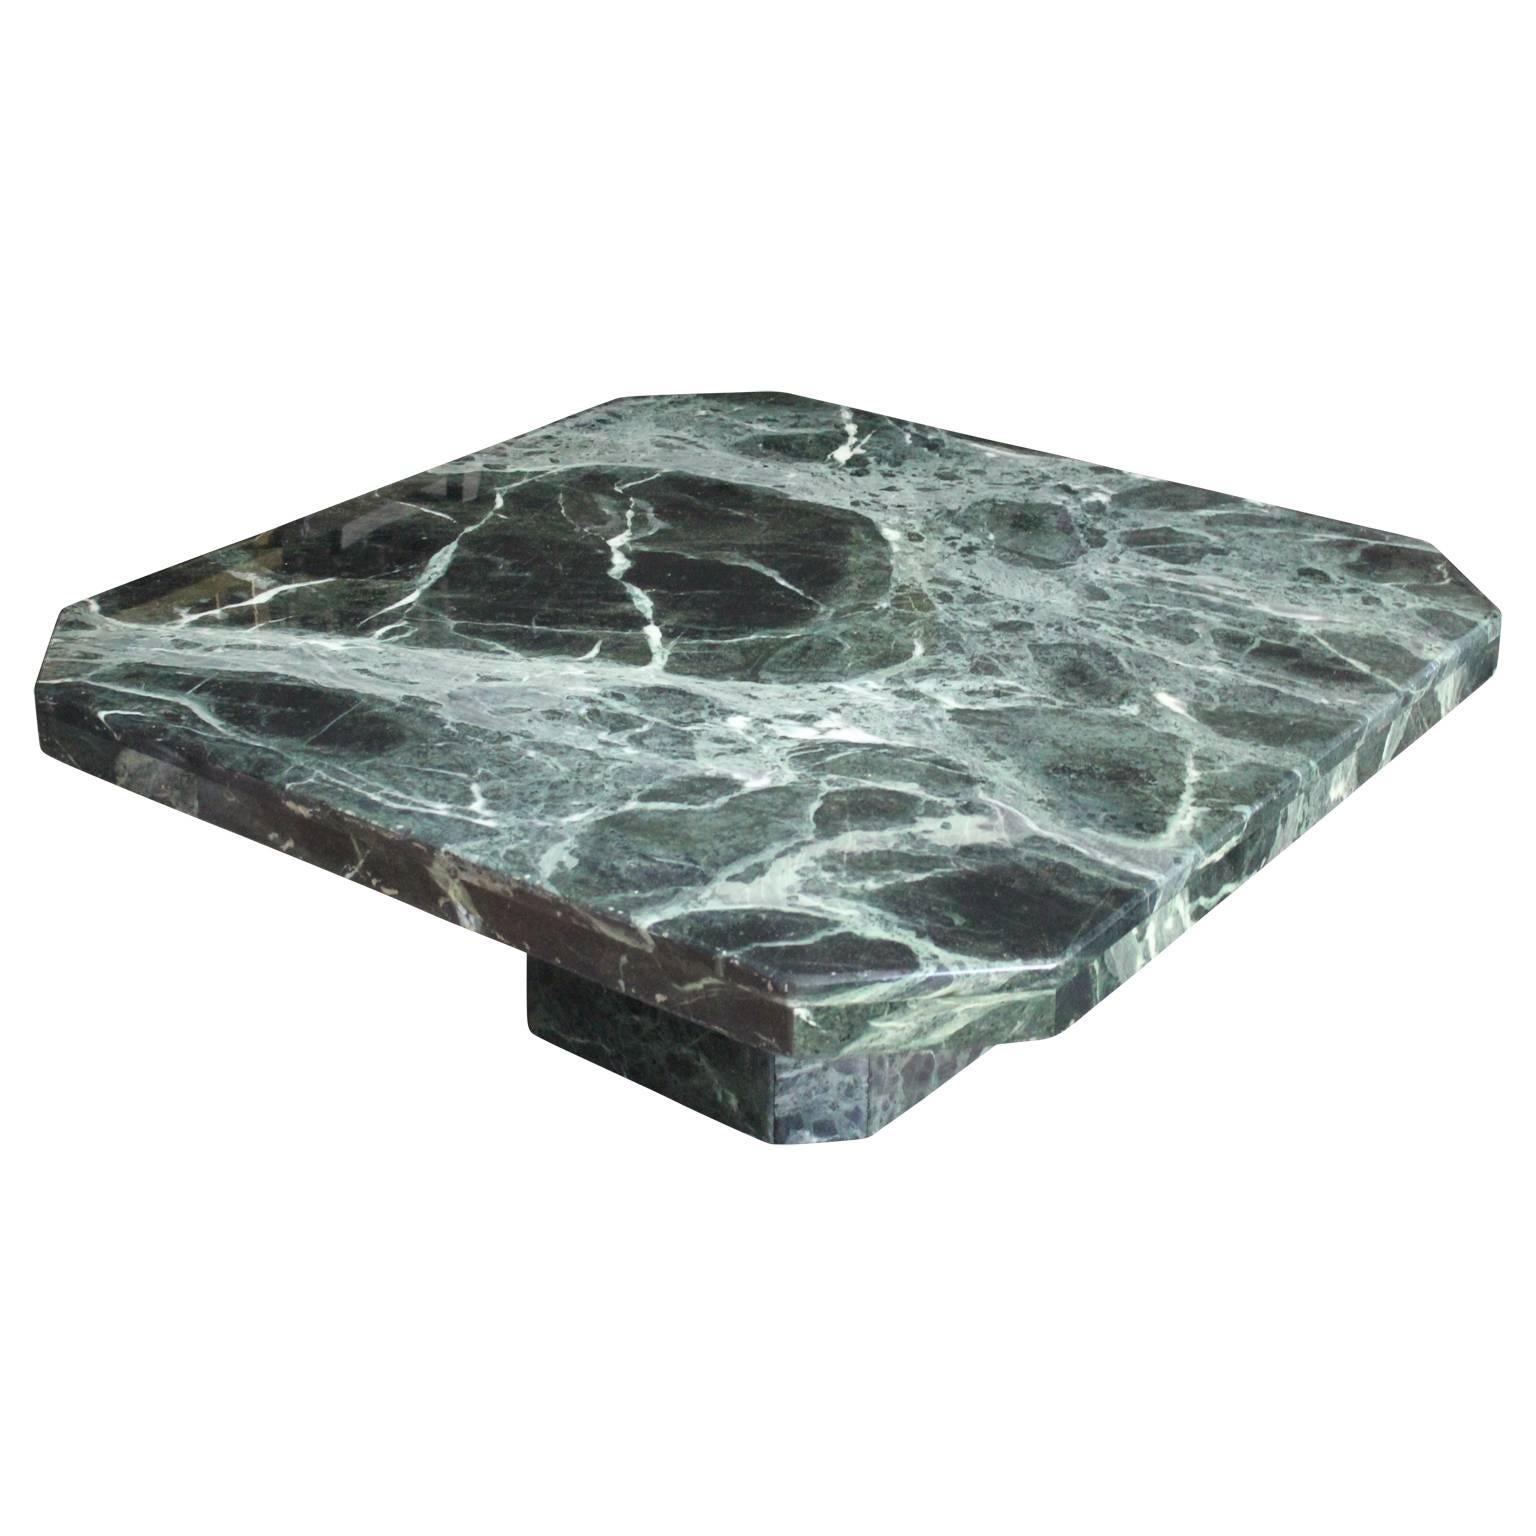 Stunning Italian pedestal coffee table made from the most gorgeous green marble. This piece is in two parts. The heavy marble top detaches from the pedestal base, making it easy to transport. Perfect addition to any modern or mid-mod space. Has a